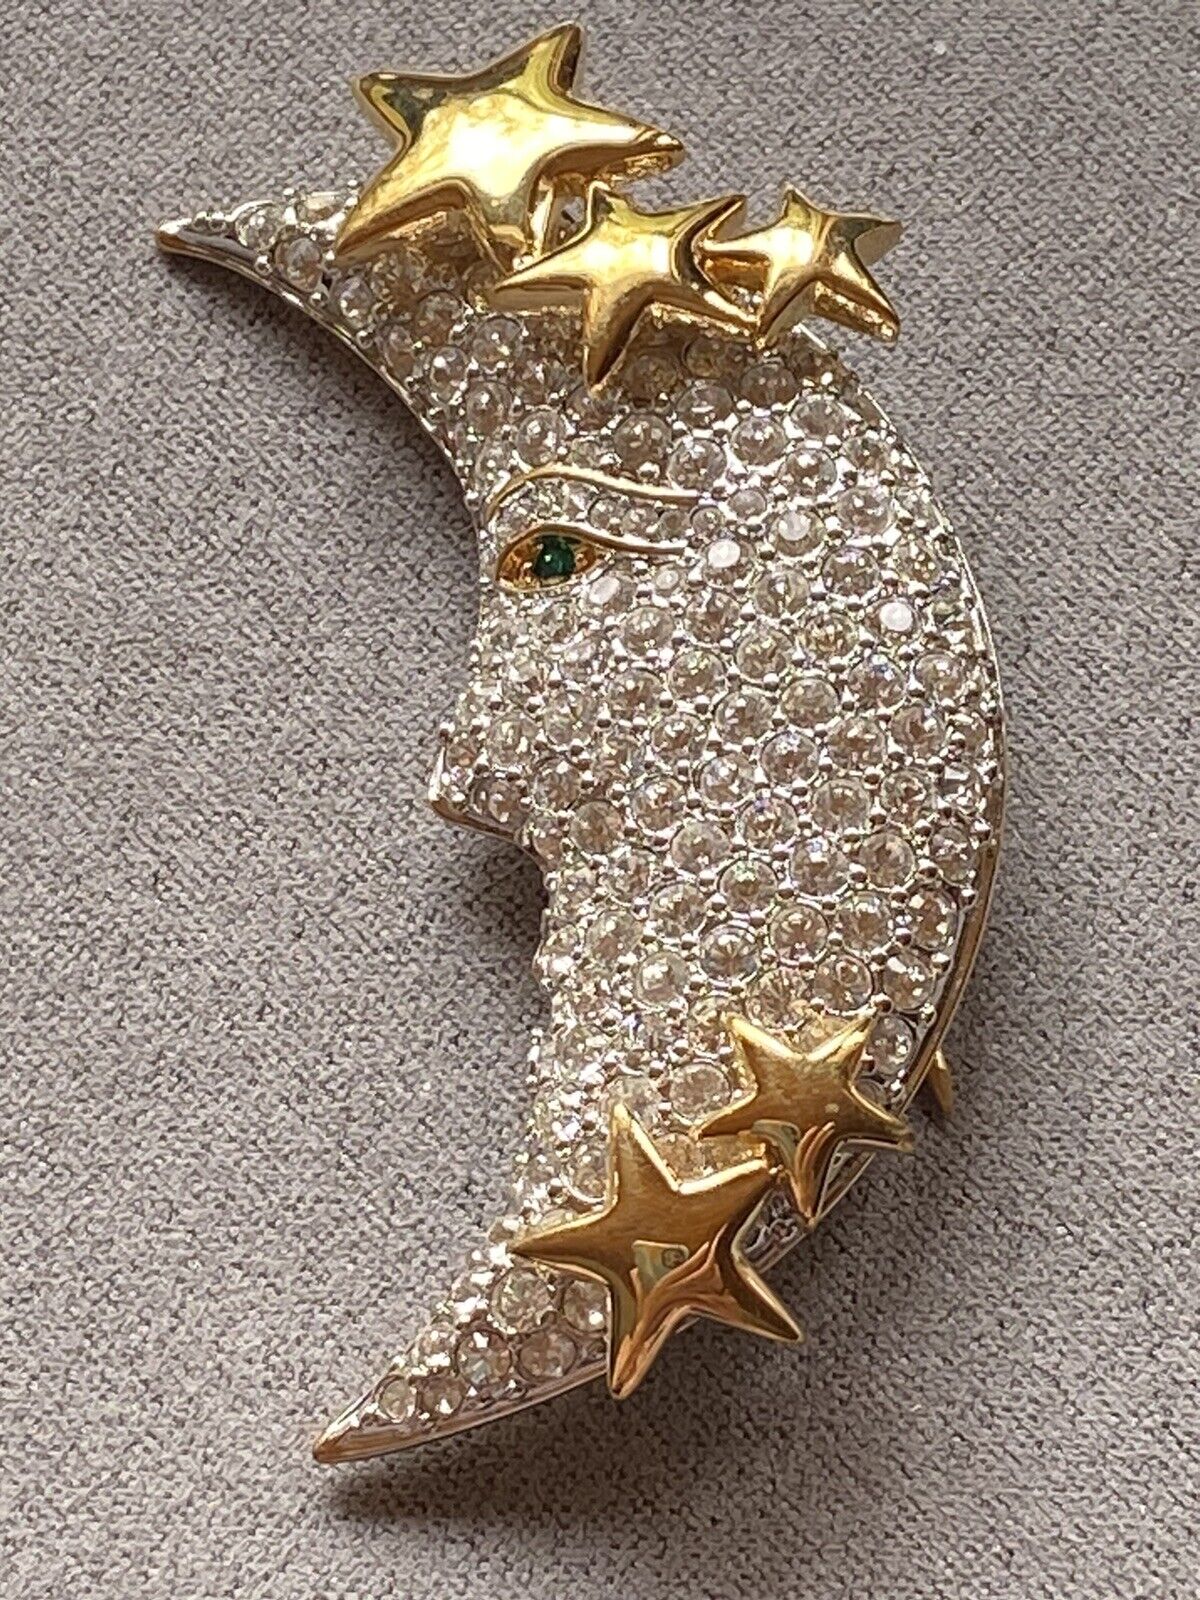 SIGNED SWAROVSKI PAVE' MOON FACE STAR  PIN ~BROOCH RETIRED